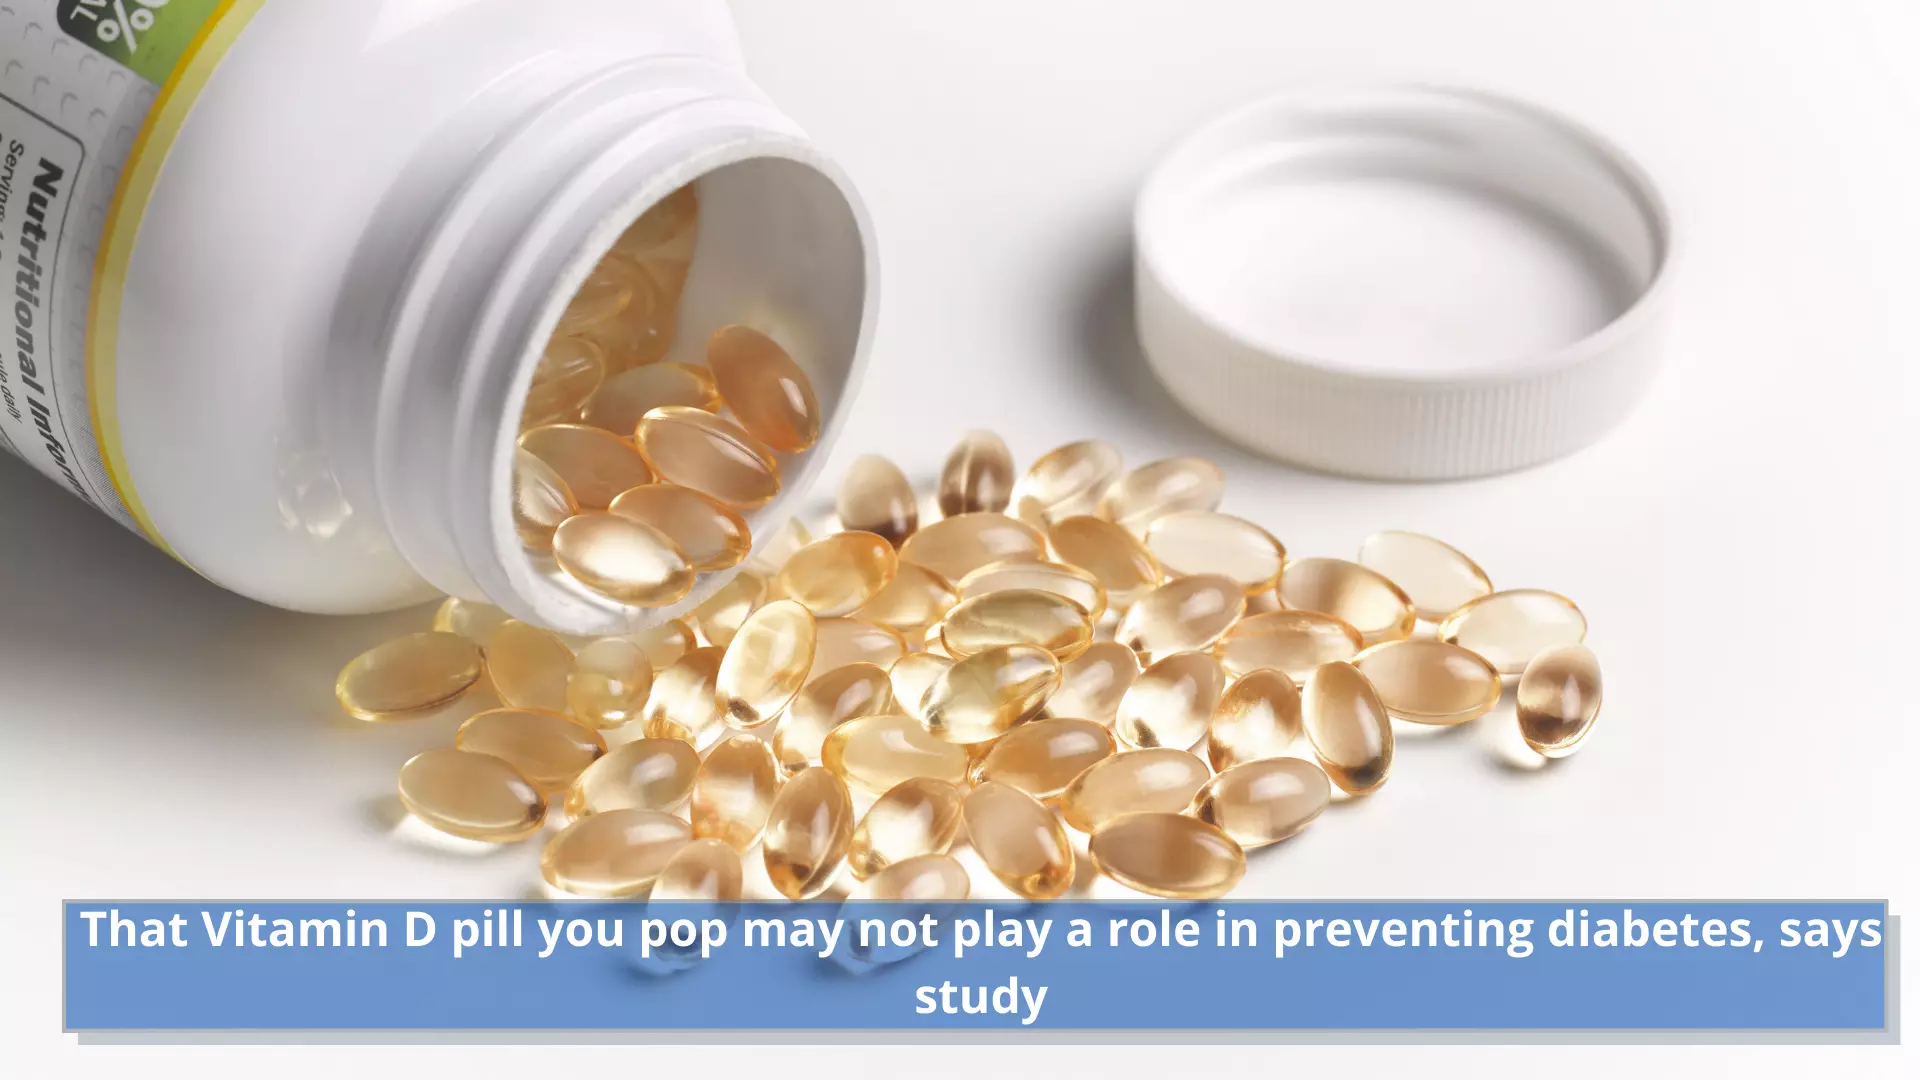 That Vitamin D pill you pop may not play a role in preventing diabetes: Study